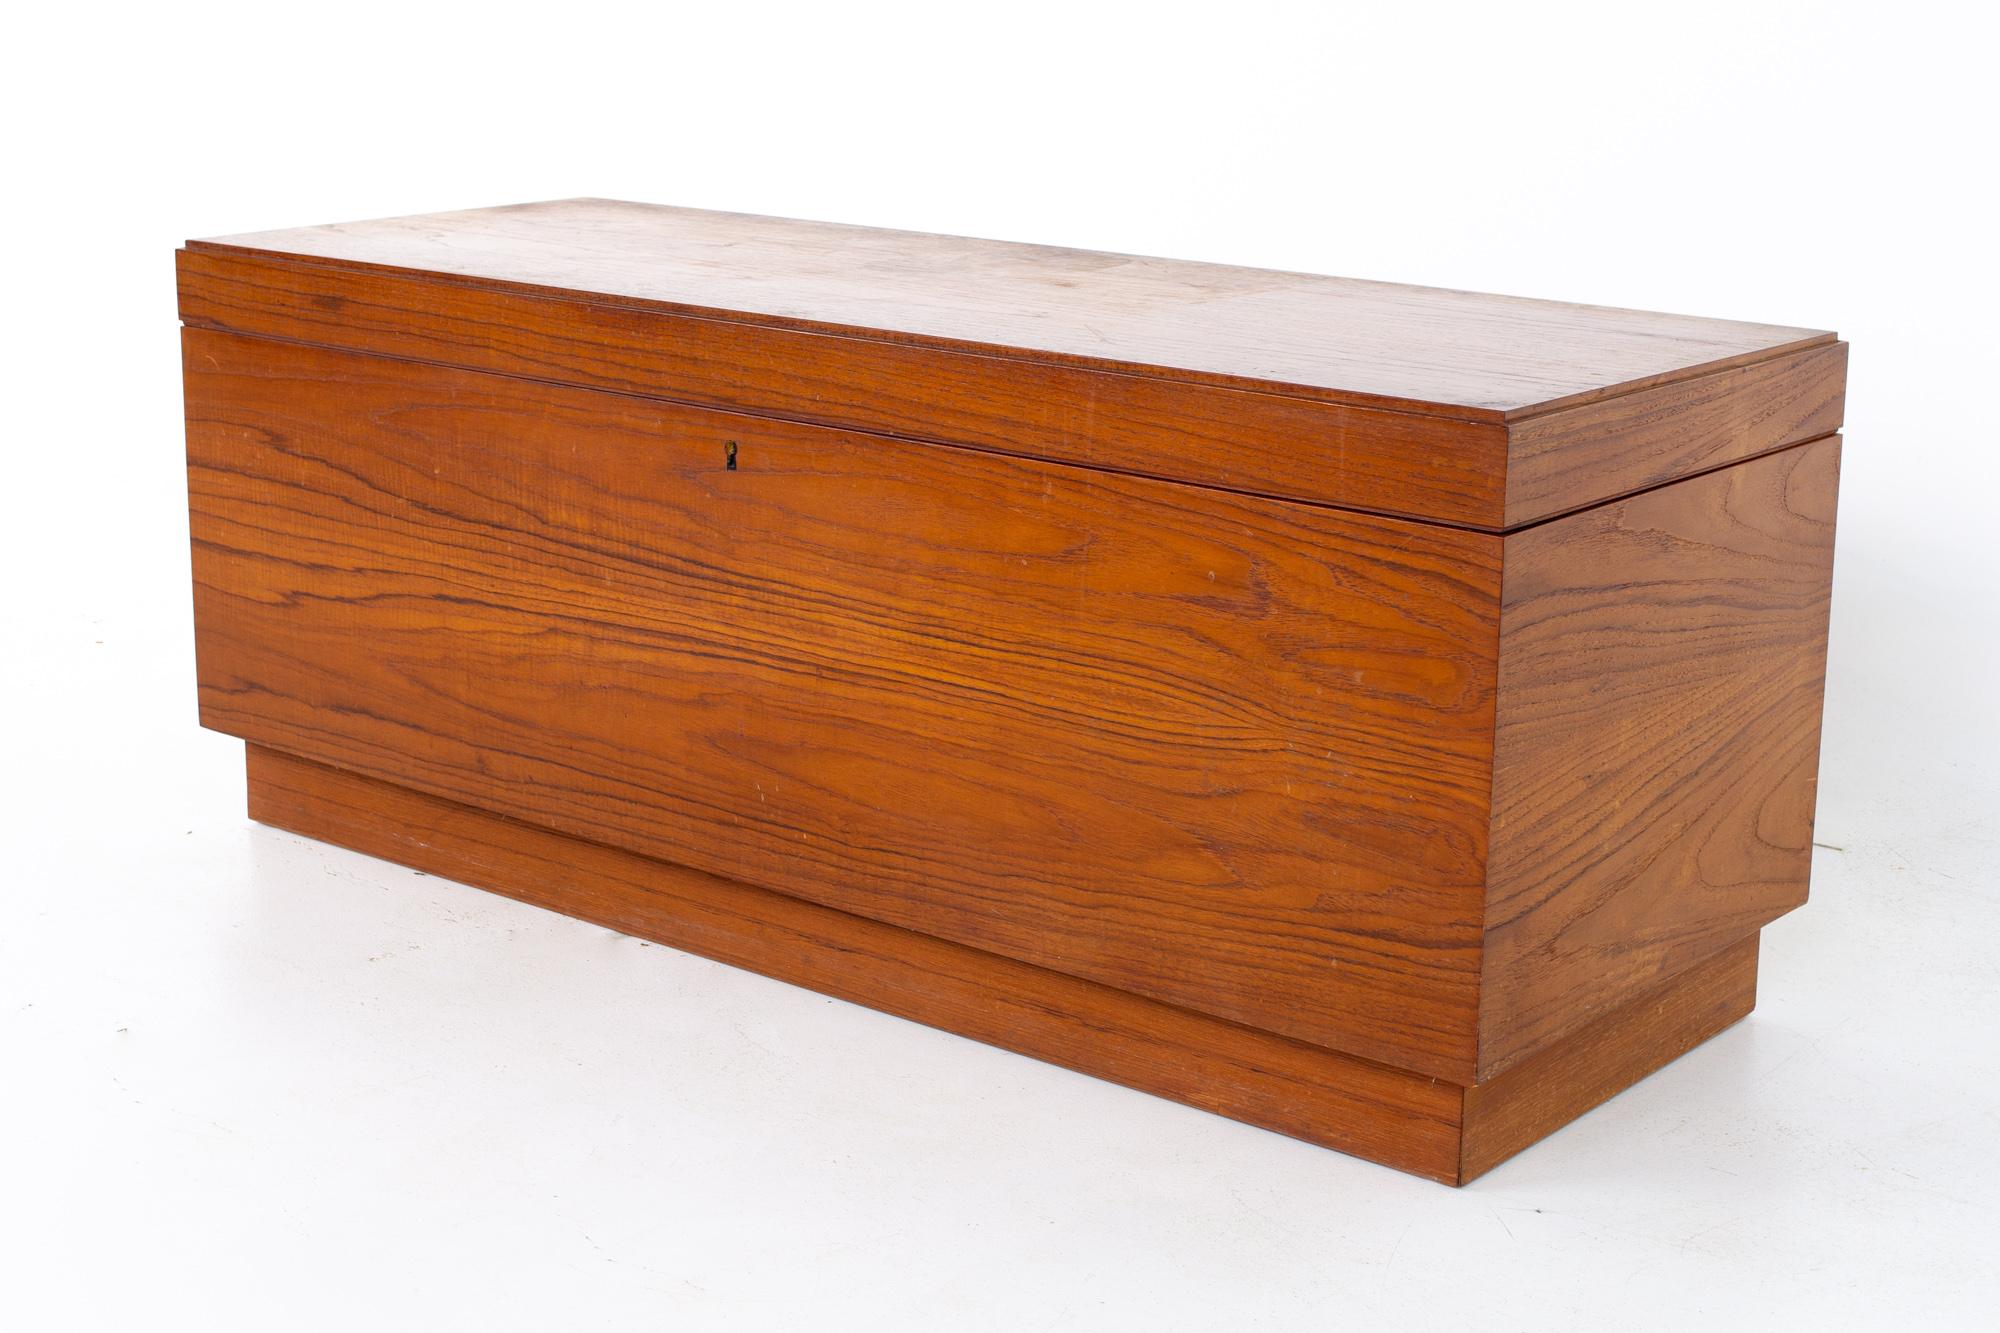 Mid century teak storage trunk bench
Bench measures: 47 wide x 17.75 deep x 19 inches high

All pieces of furniture can be had in what we call restored vintage condition. That means the piece is restored upon purchase so it’s free of watermarks,